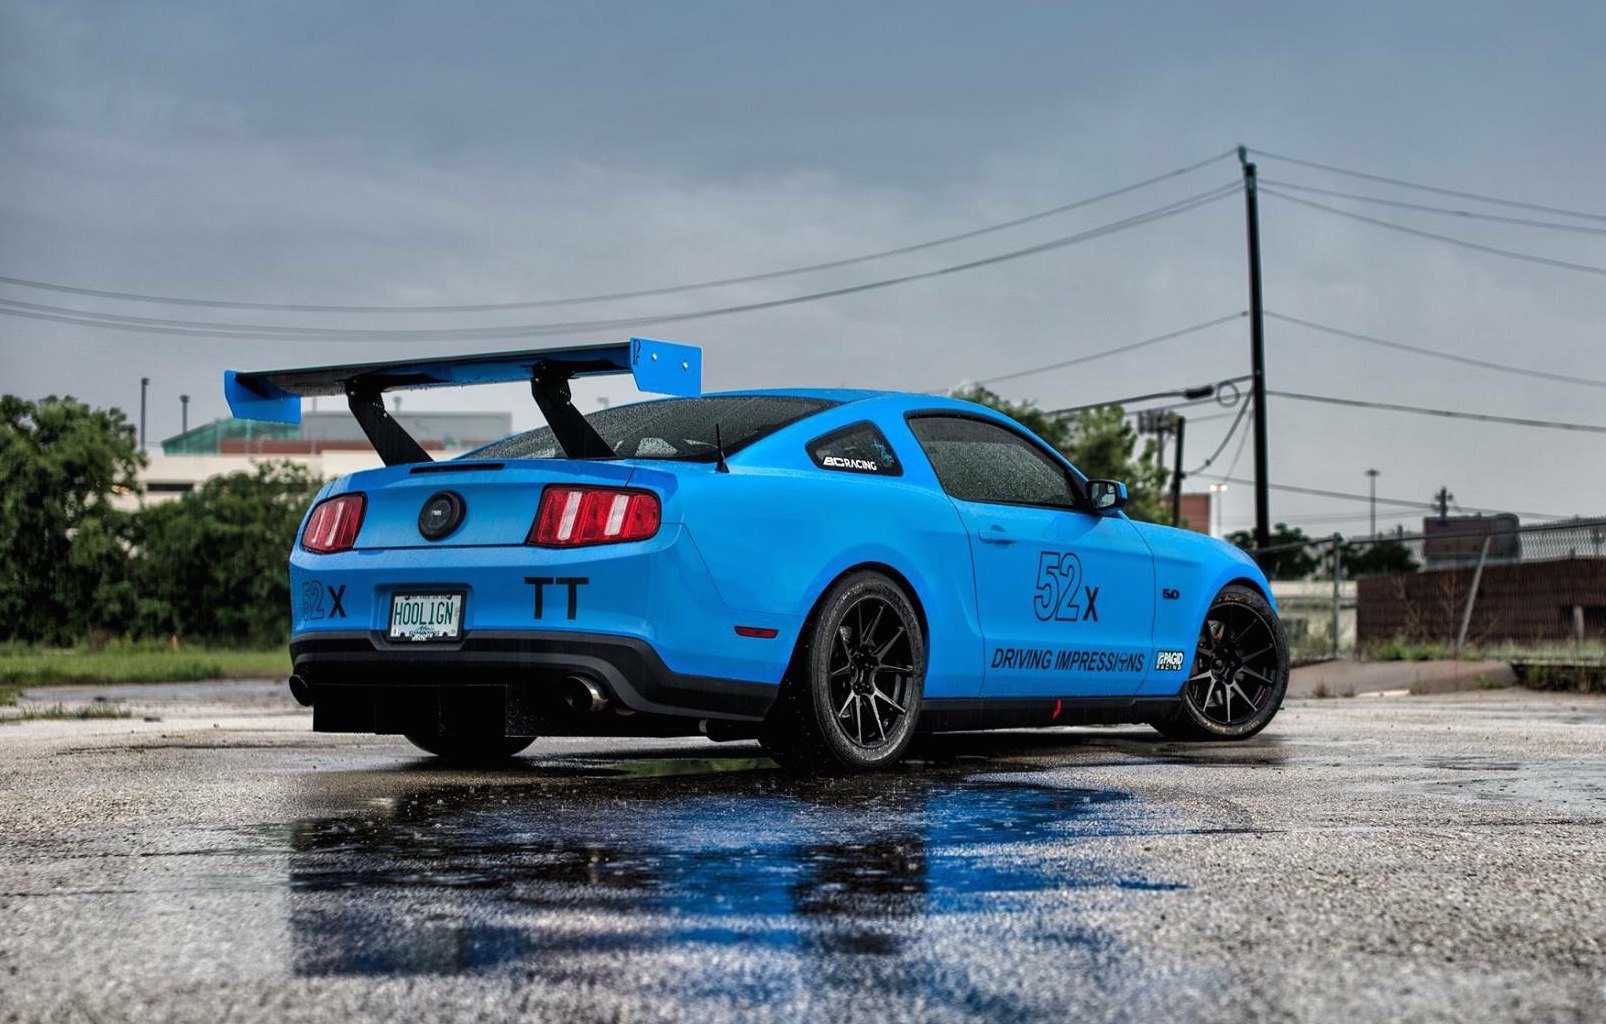 Large Wing Spoiler on Blue Ford Mustang 5.0 - Photo by Forgeline Motorsports